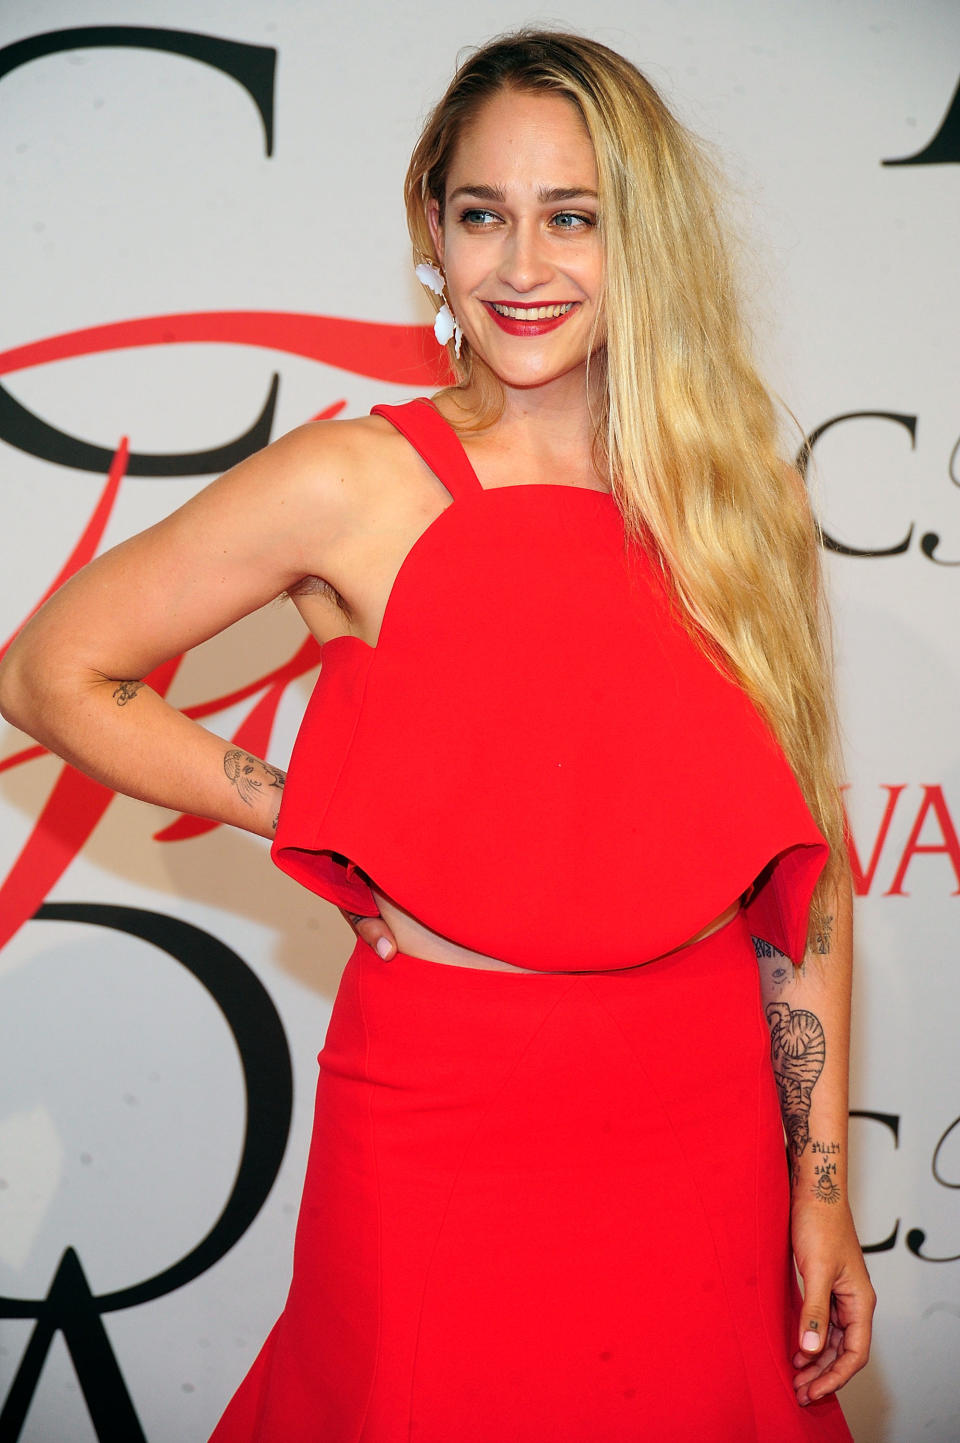 ‘Girls’ star Jemima Kirke (and her armpit hair) caused a storm at the 2015 CFDA Awards